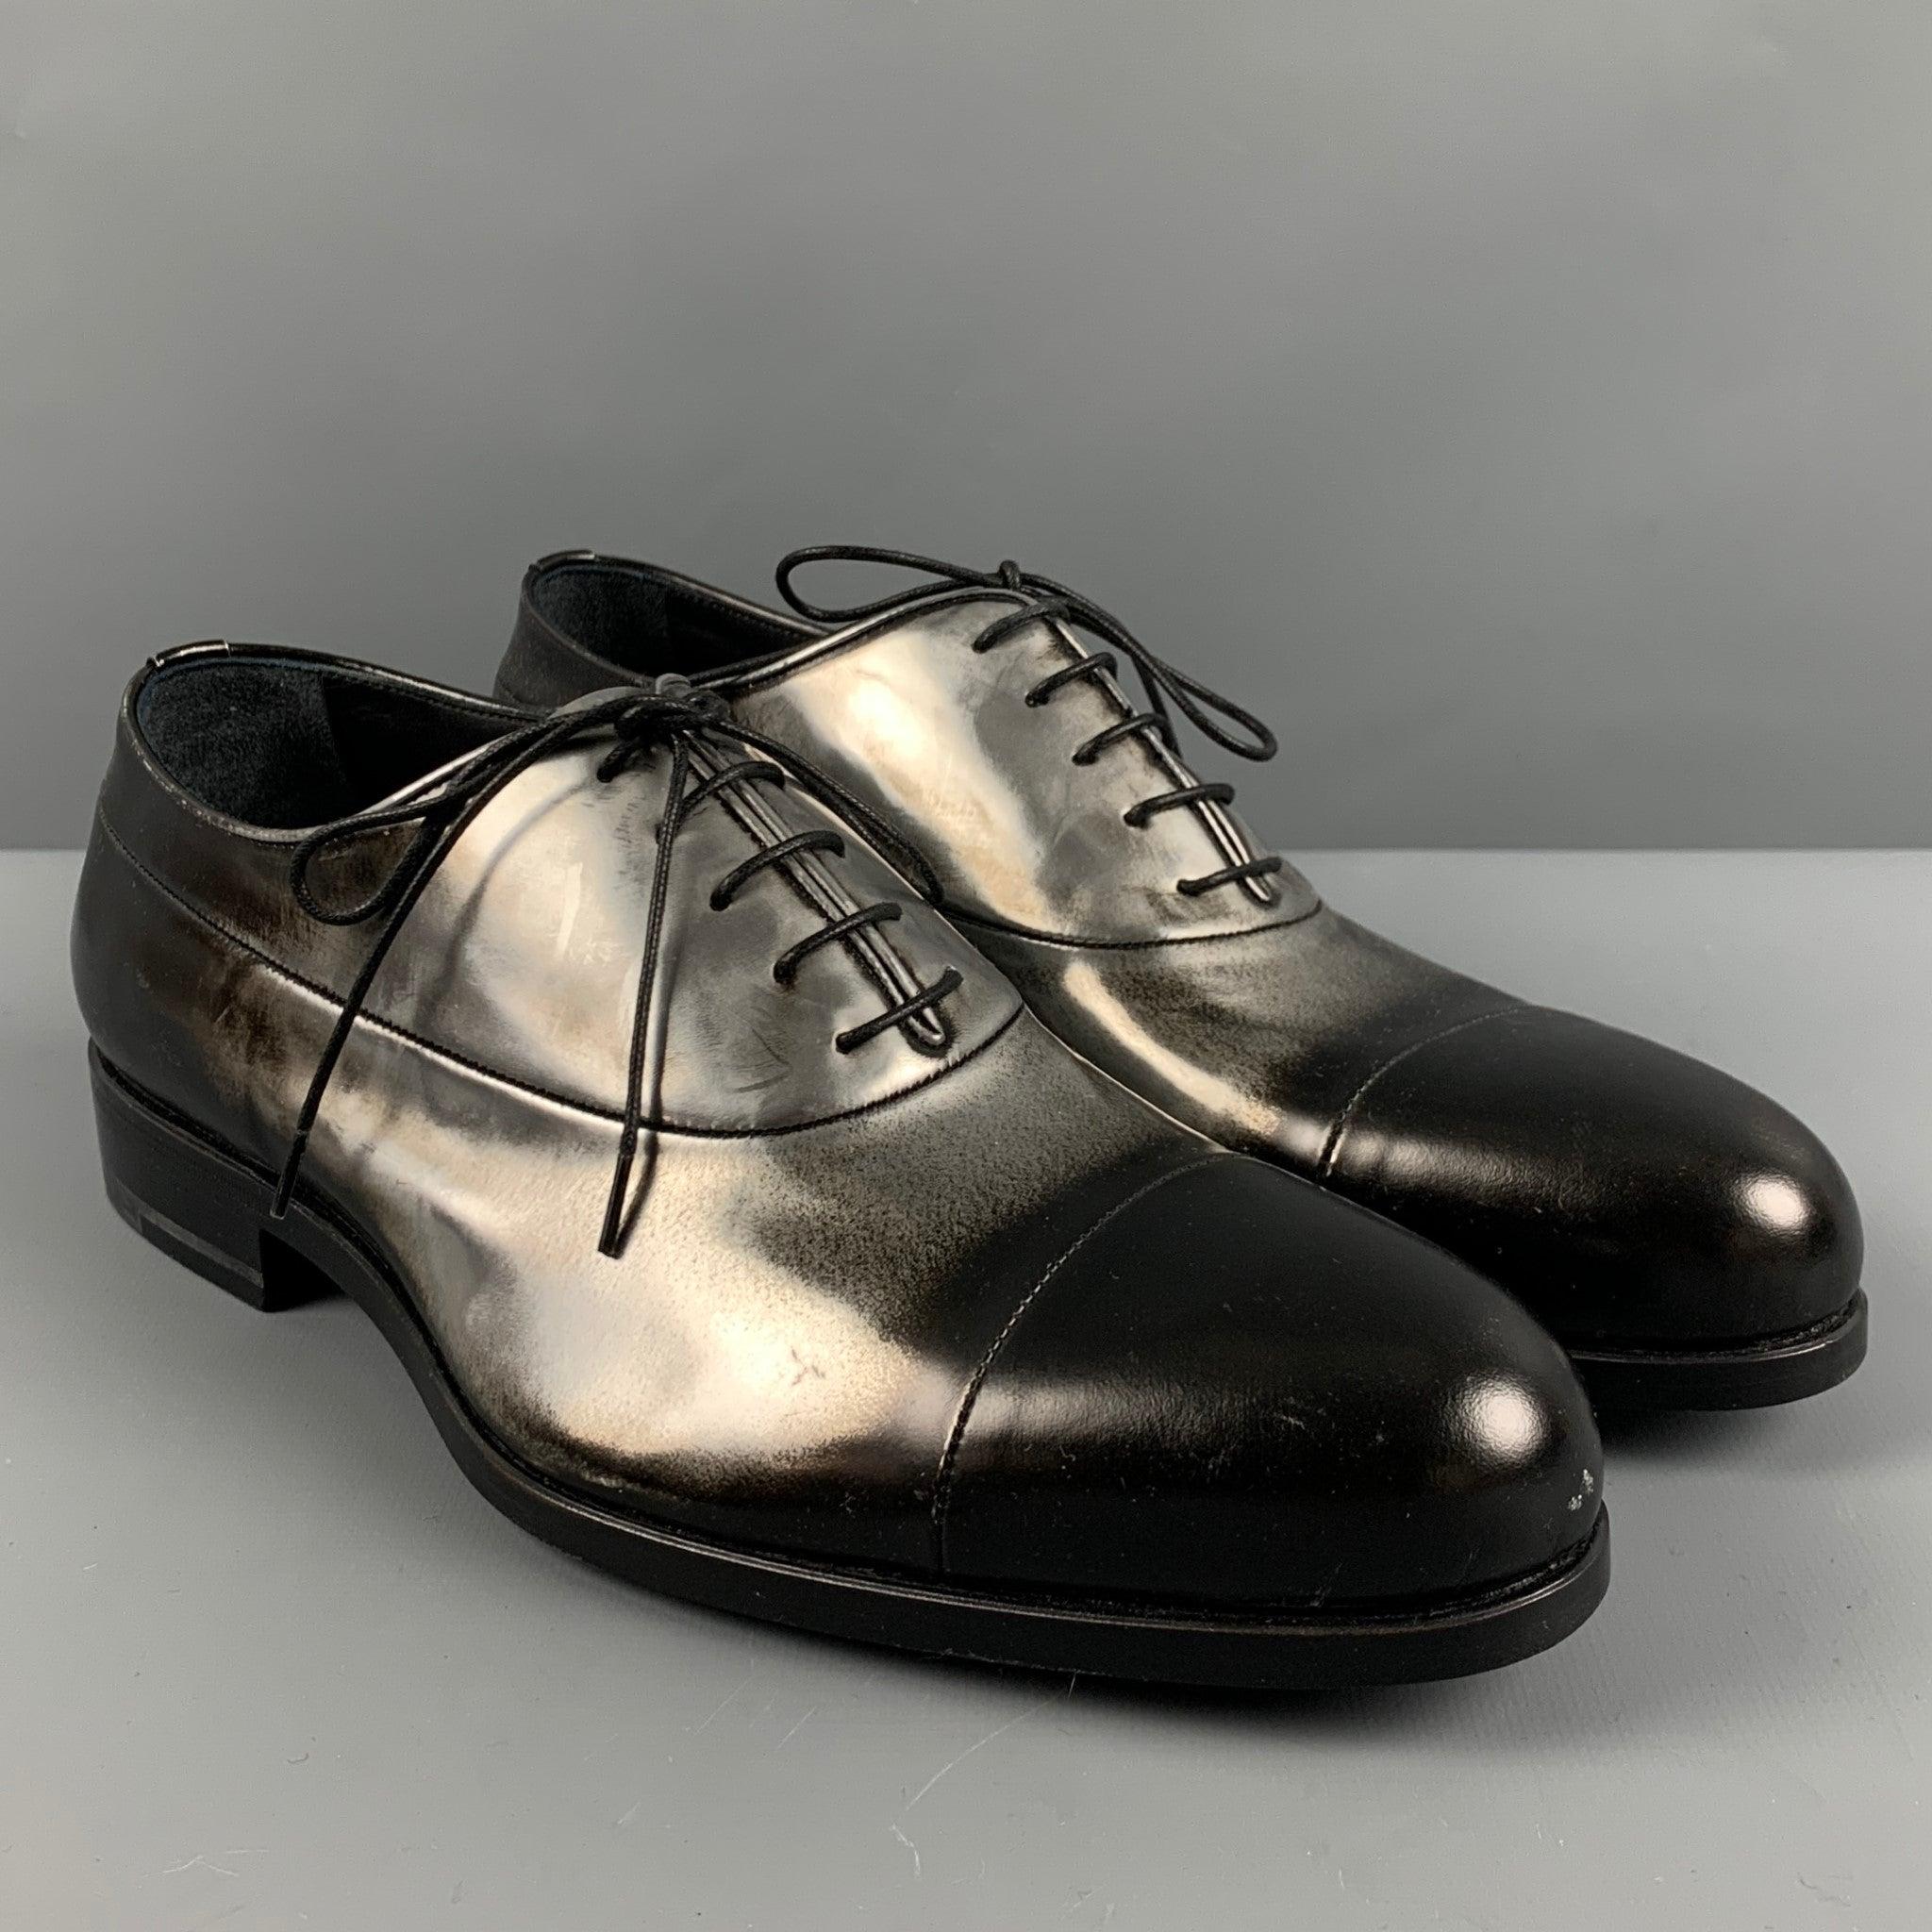 JIL SANDER shoes
in a black and silver leather featuring ombre design, and lace-up closure. Comes with dust bag. Made in Italy.New without box. 

Marked:   39.5Outsole: 10.75 inches  x 3.5 inches 
  
  
 
Reference: 127638
Category: Laces
More